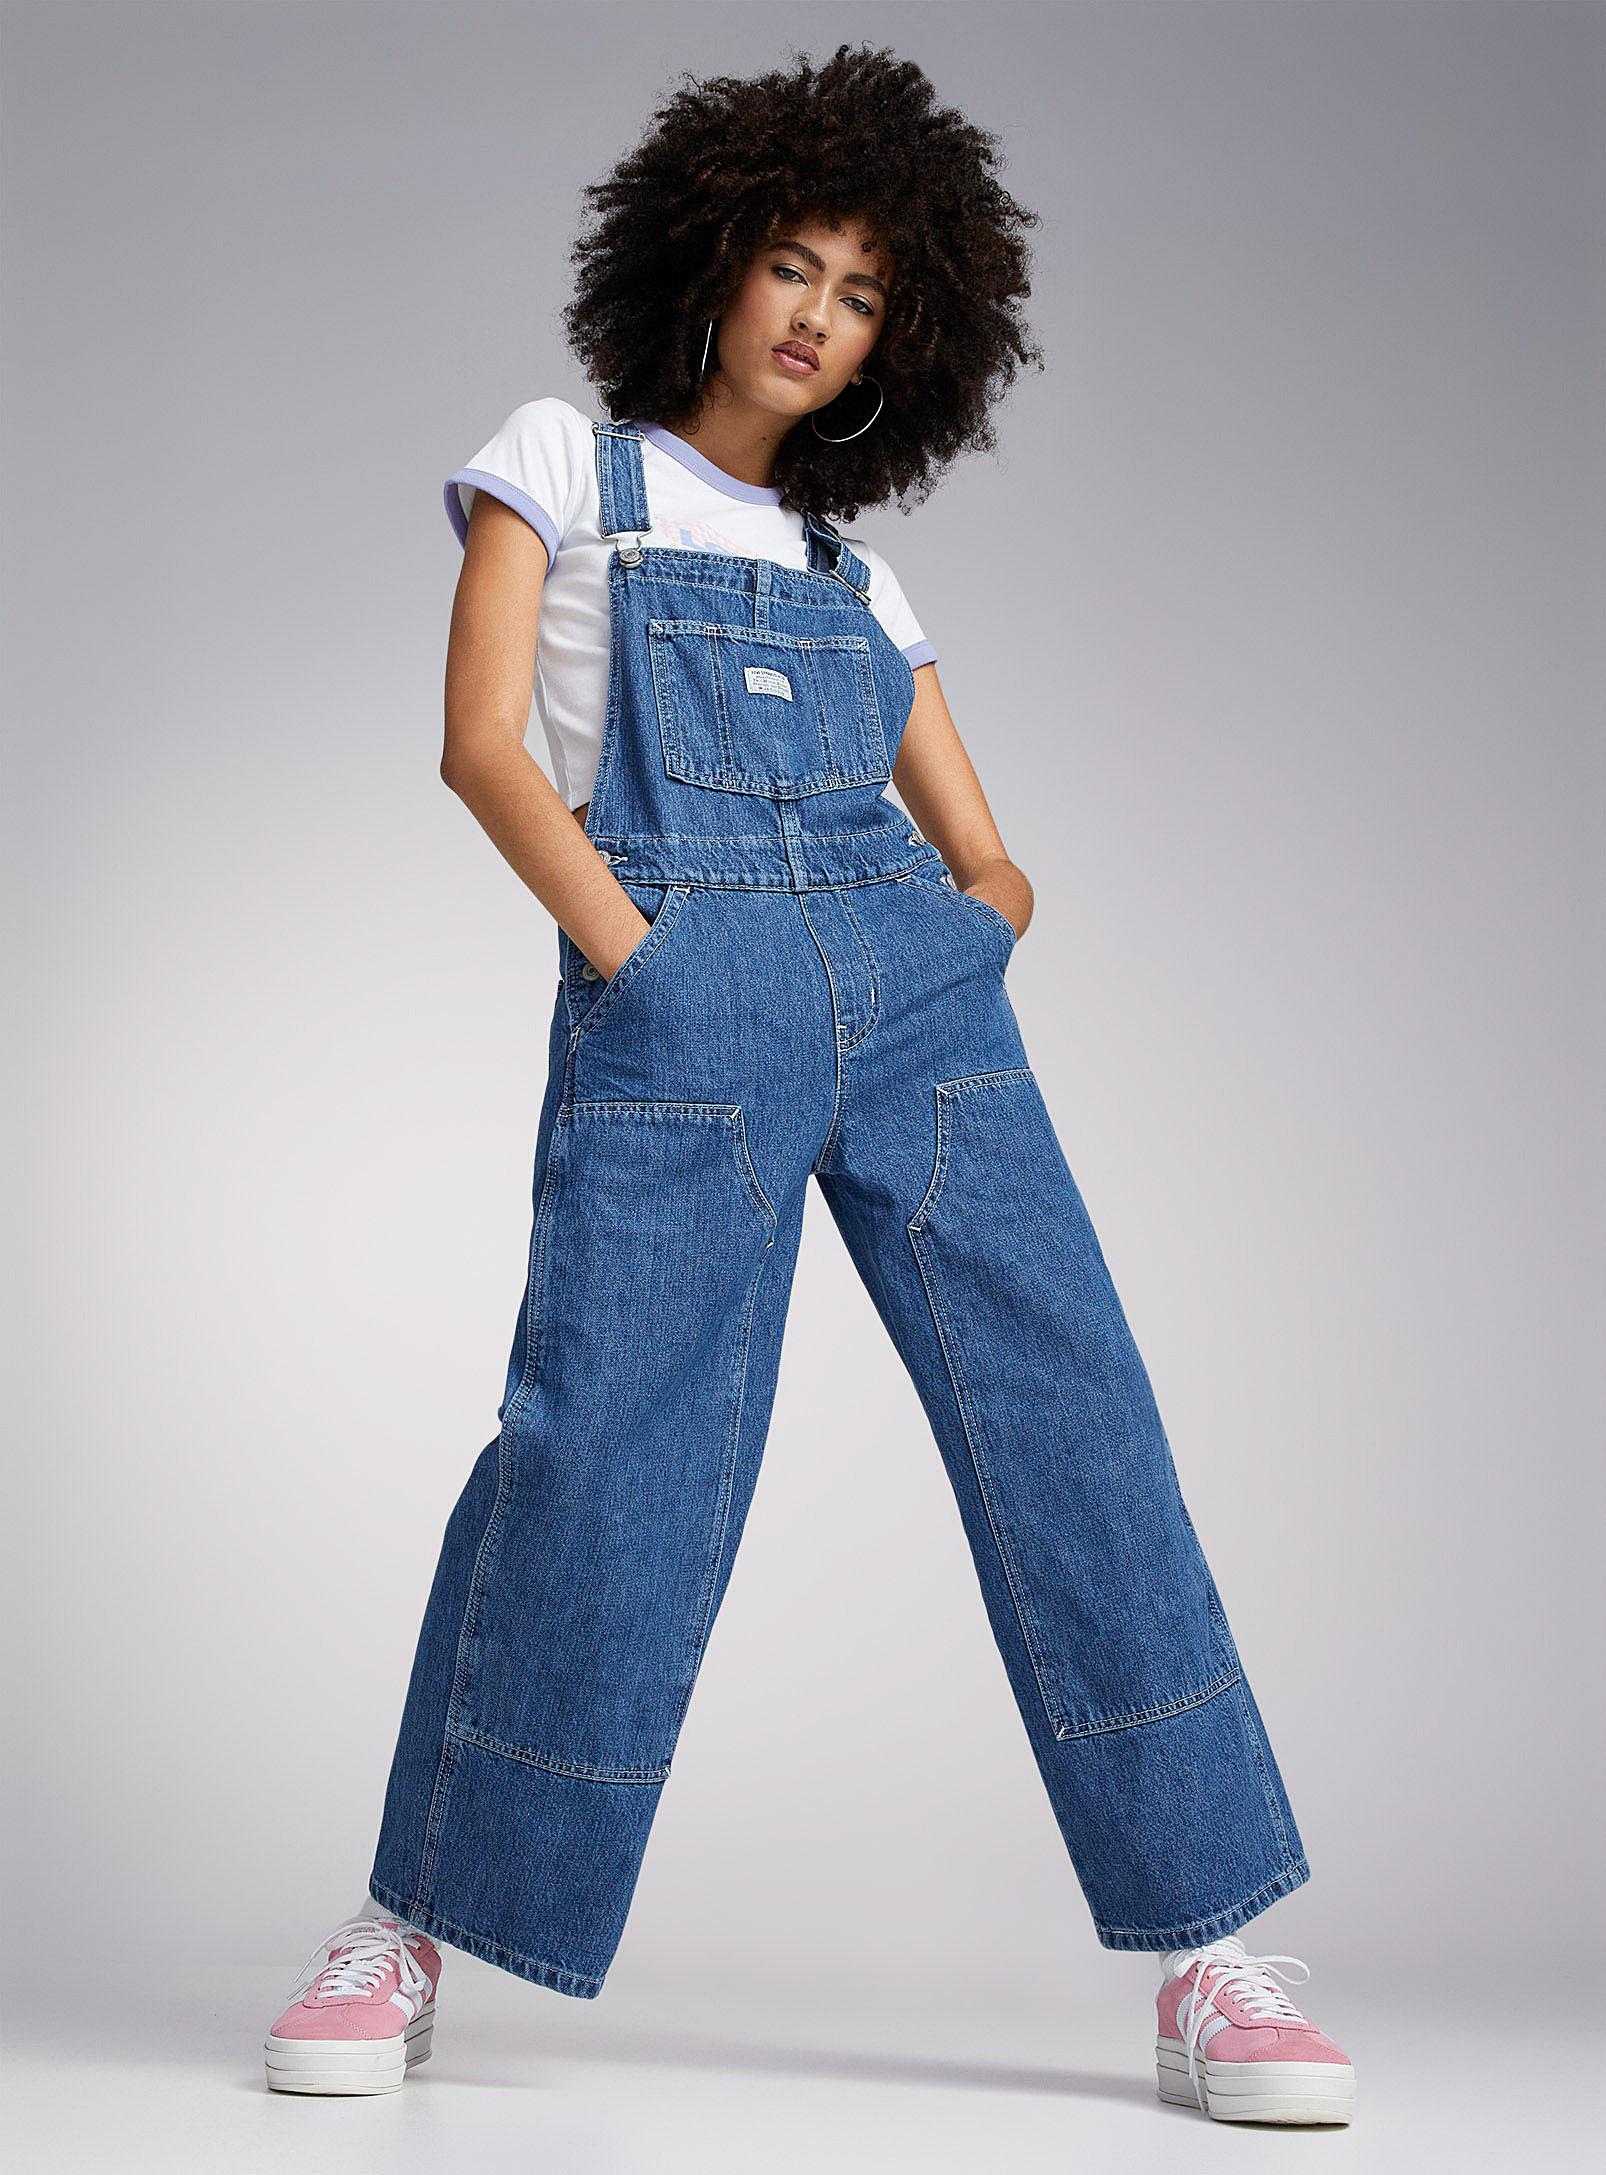 Levi's Faded Denim Loose Workwear Overalls in Blue | Lyst